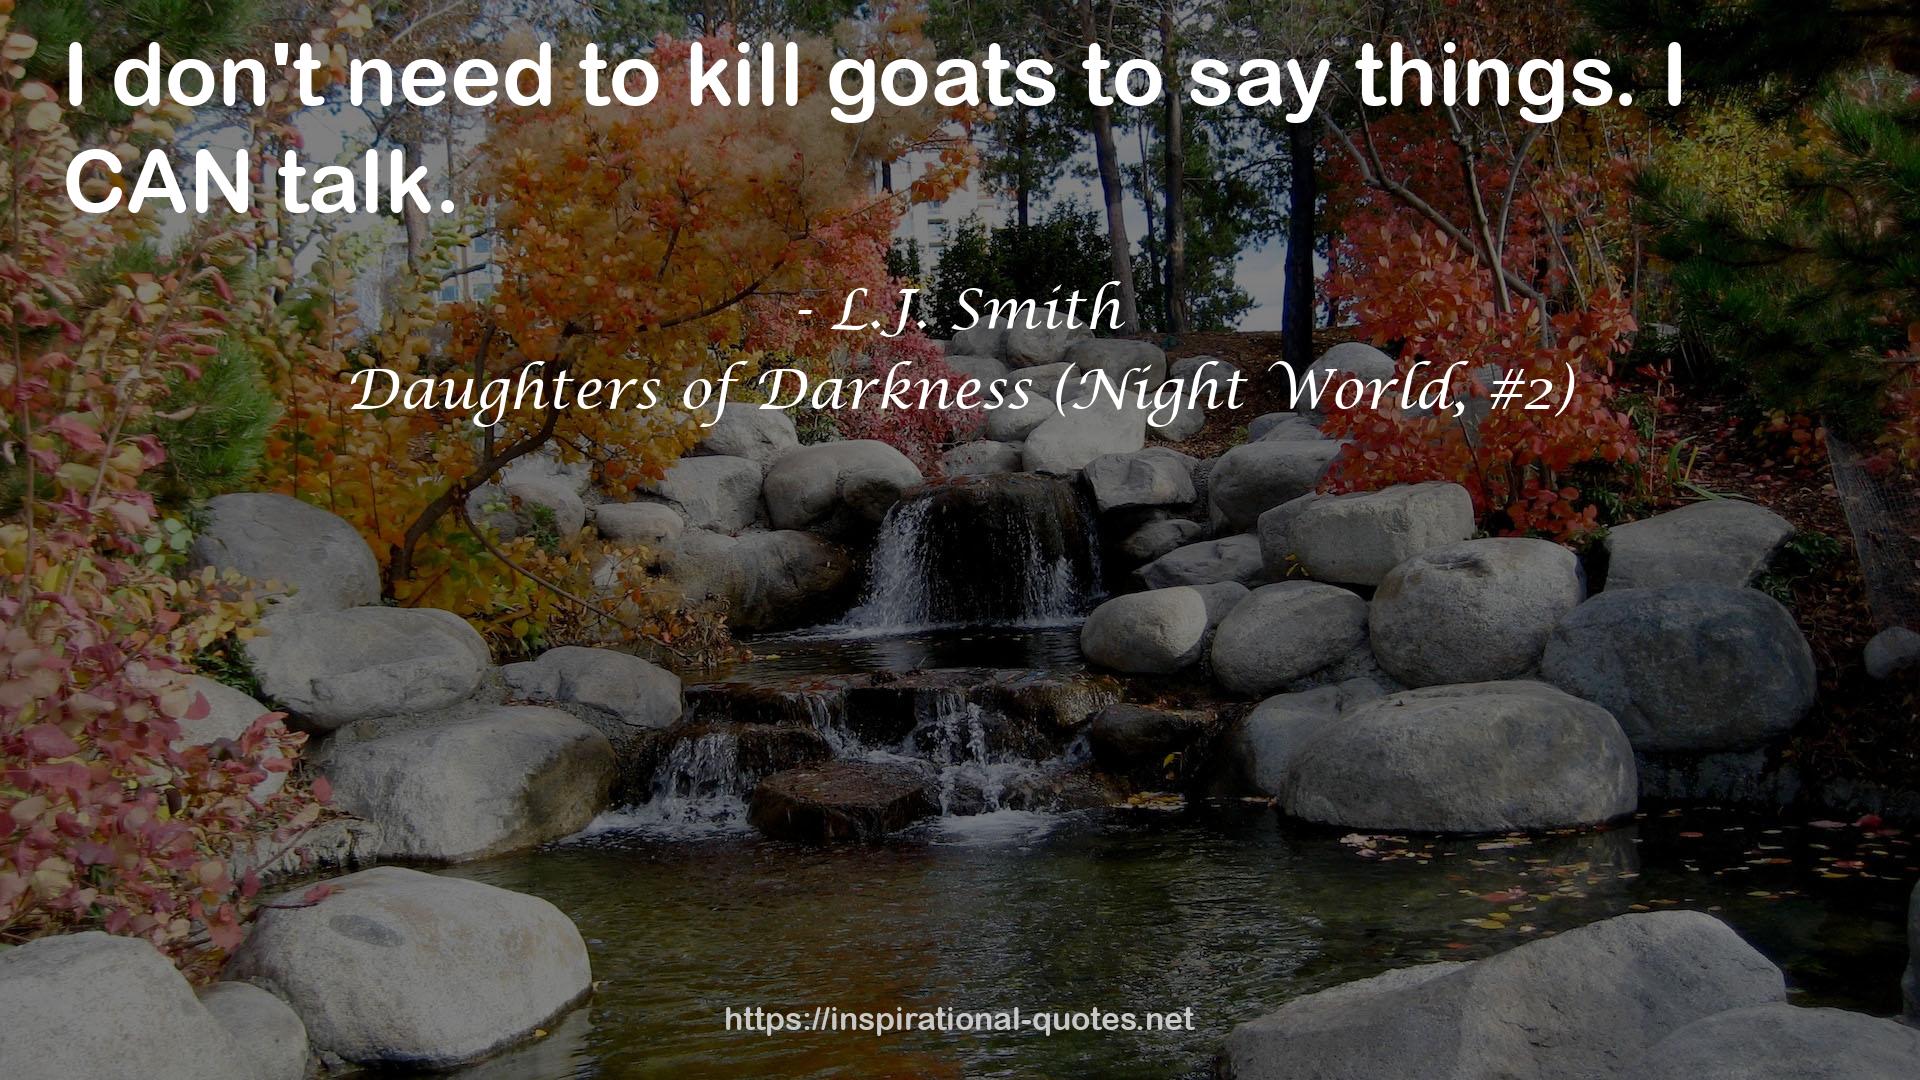 Daughters of Darkness (Night World, #2) QUOTES